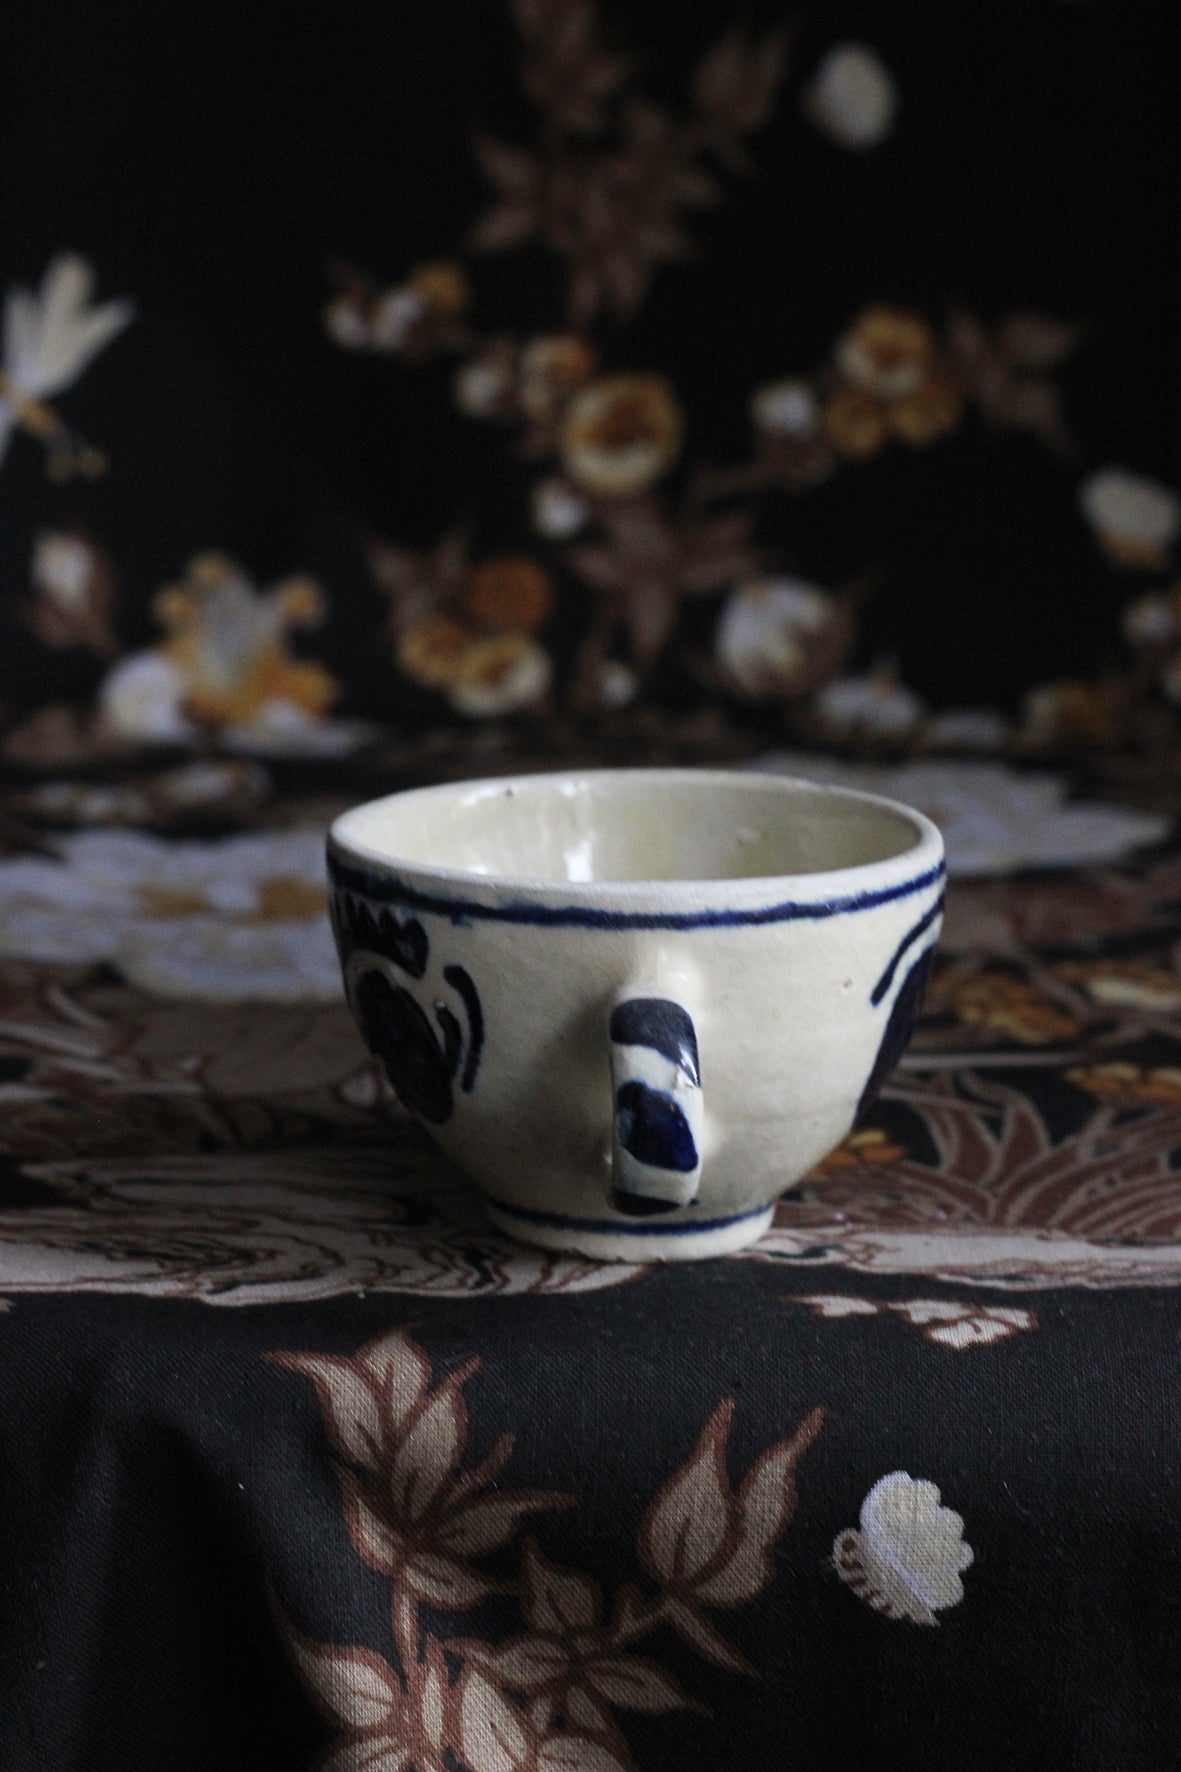 Old Small Folk Cup